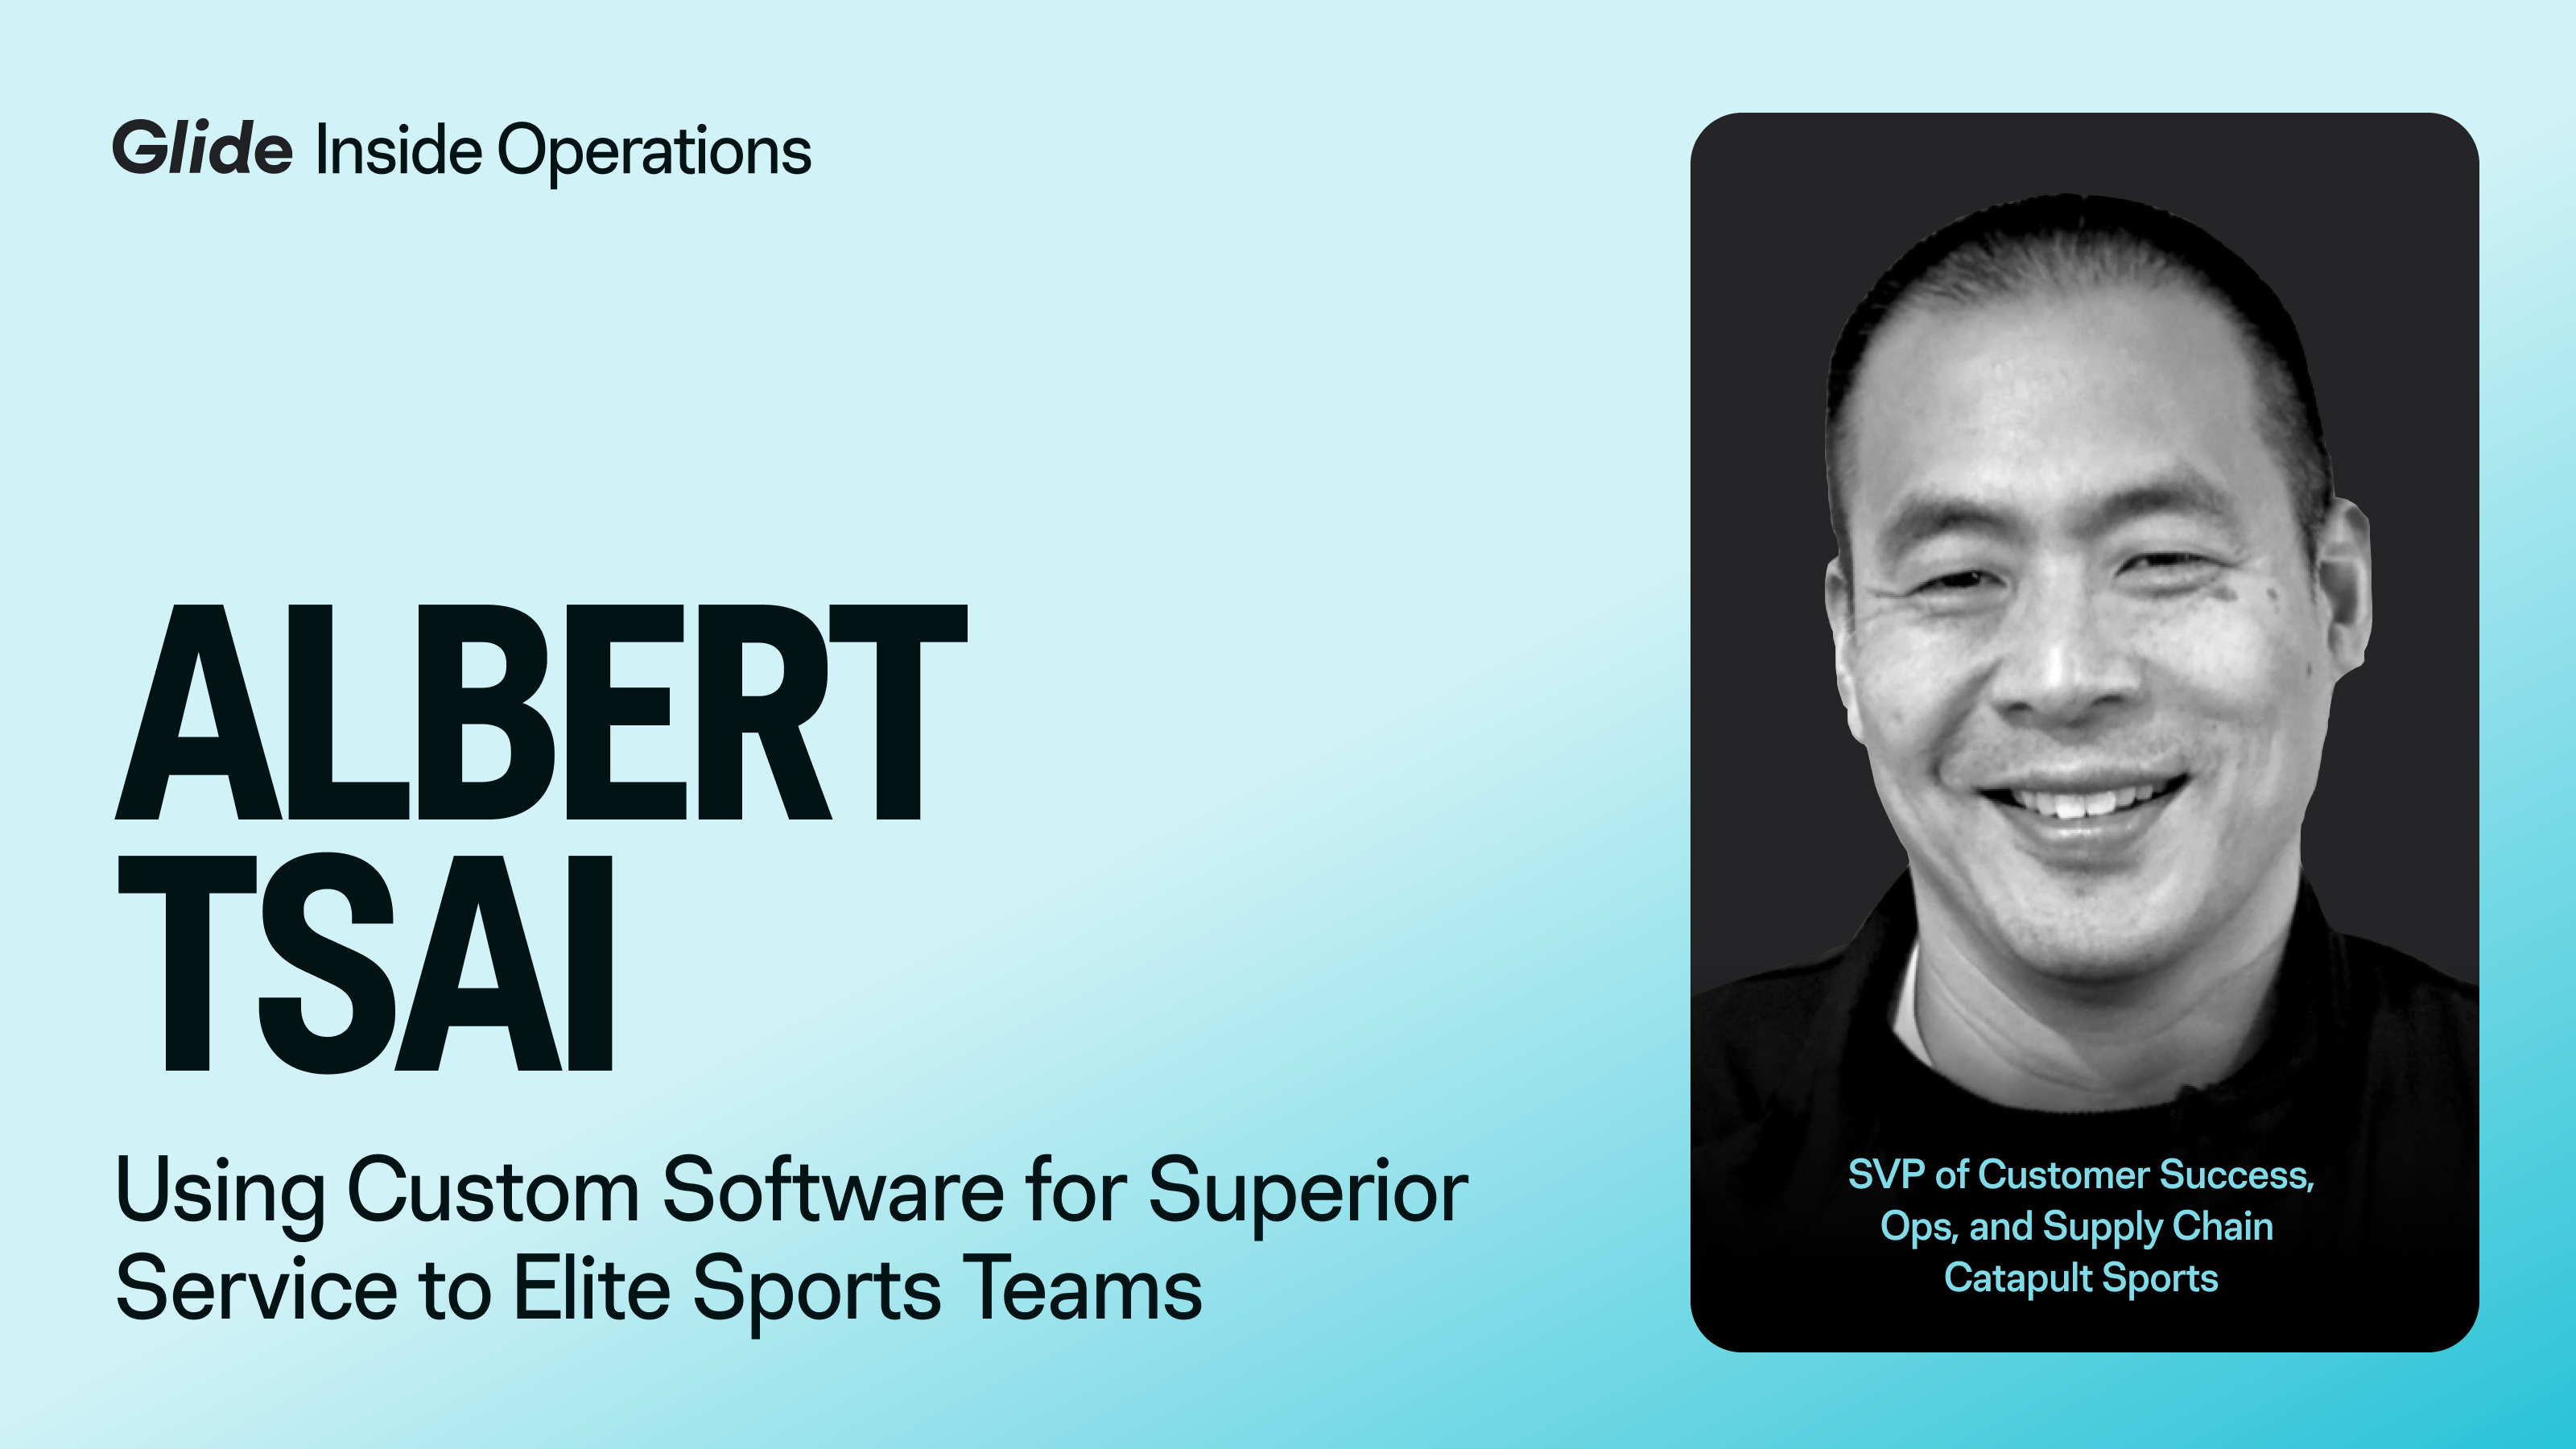 Inside Operations with Albert Tsai, Catapult Sports